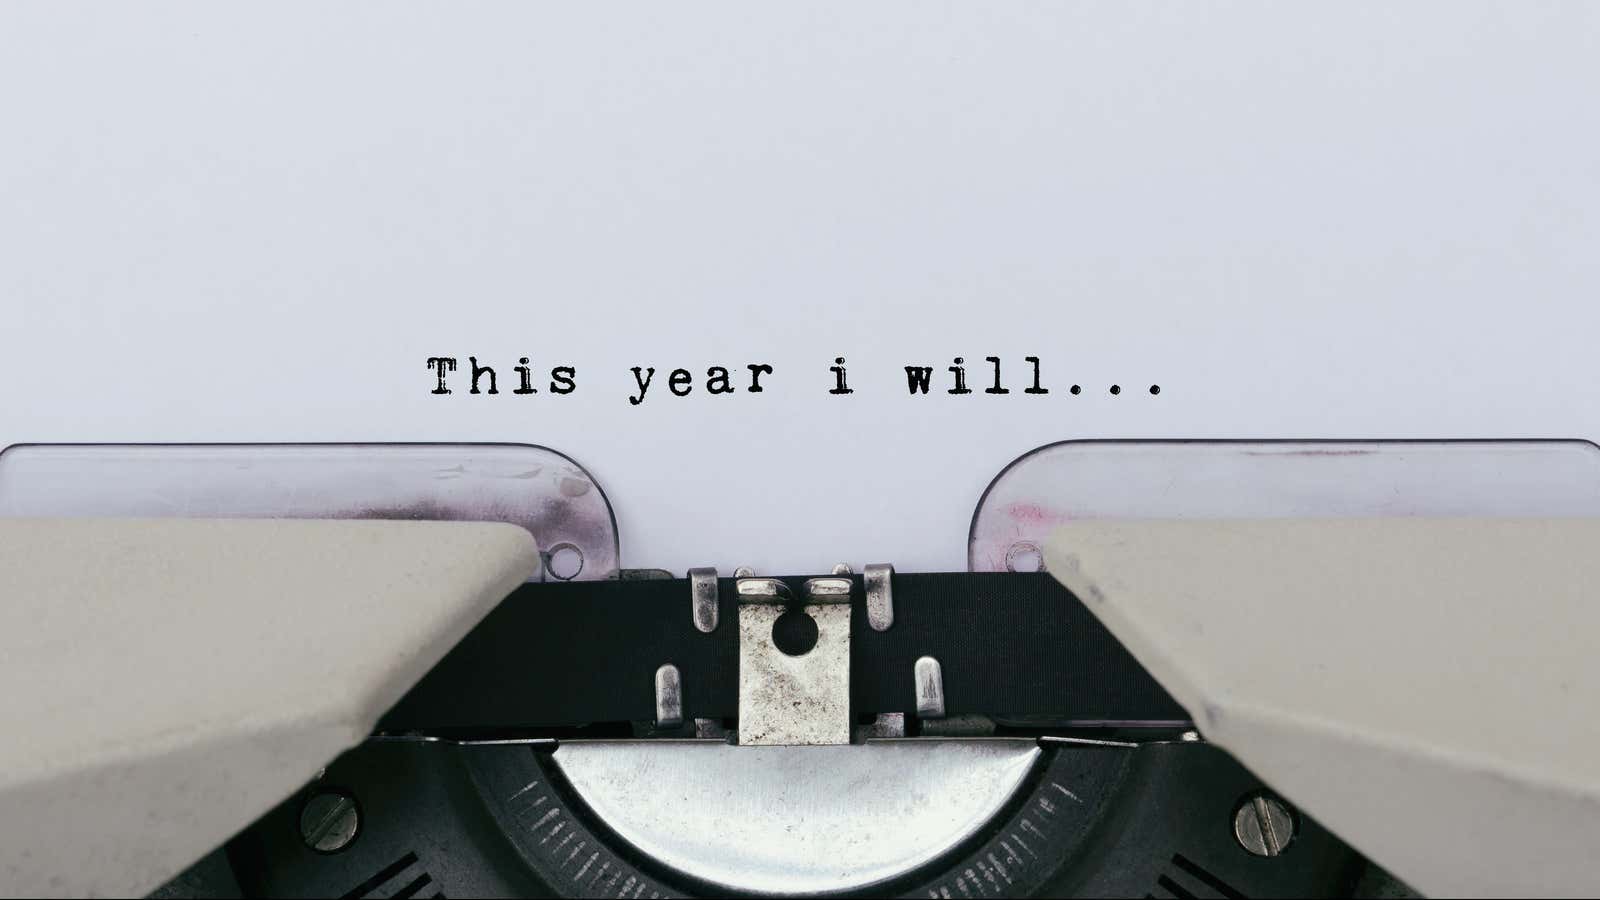 Don’t be a statistic; write resolutions you can keep.